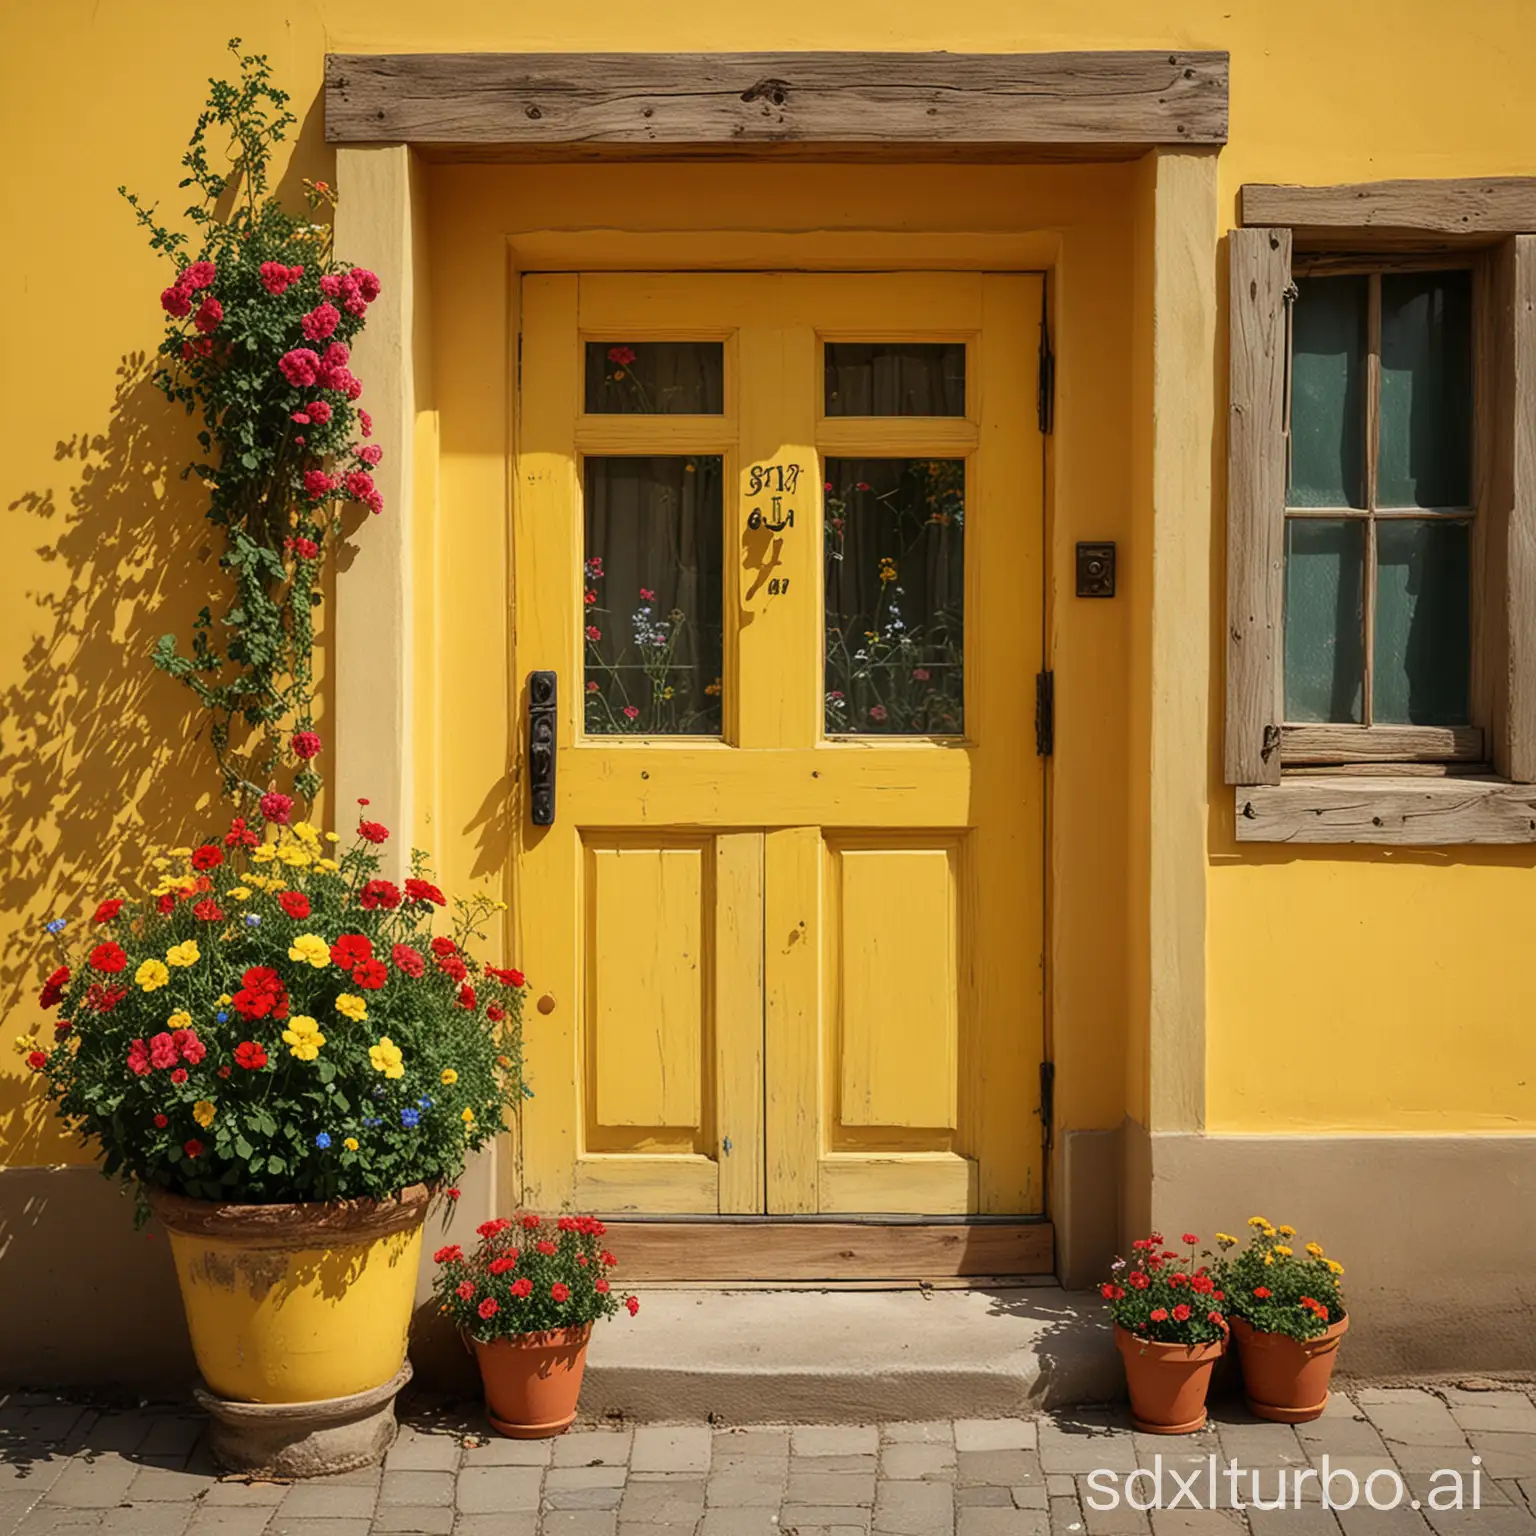 it's a bit of a broad perspective. have a yellow background. a wooden door that opens to both sides. make the top of the door round. Have big tall flowers in colorful pots in front. let it be a more nostalgic image. i want this image for children, can you minimize it even more?